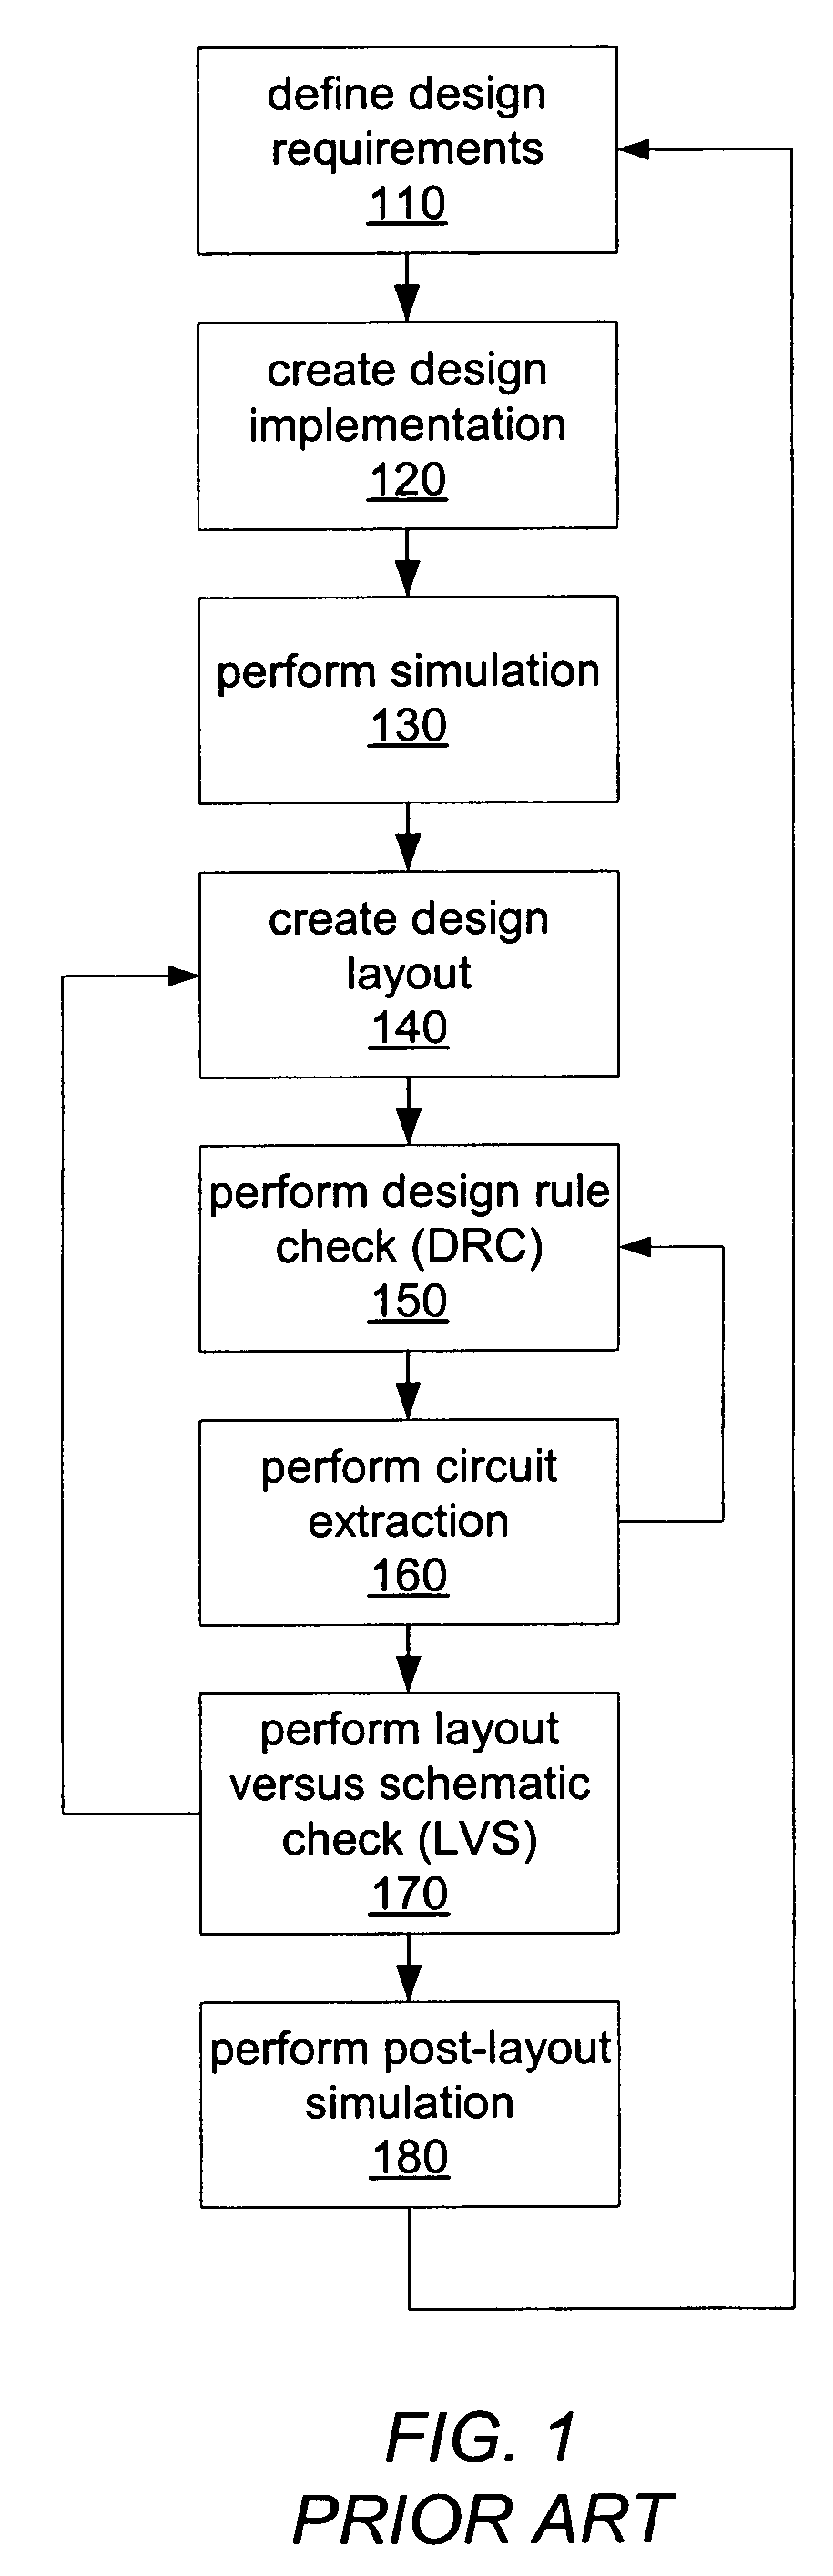 Automated correction of asymmetric enclosure rule violations in a design layout